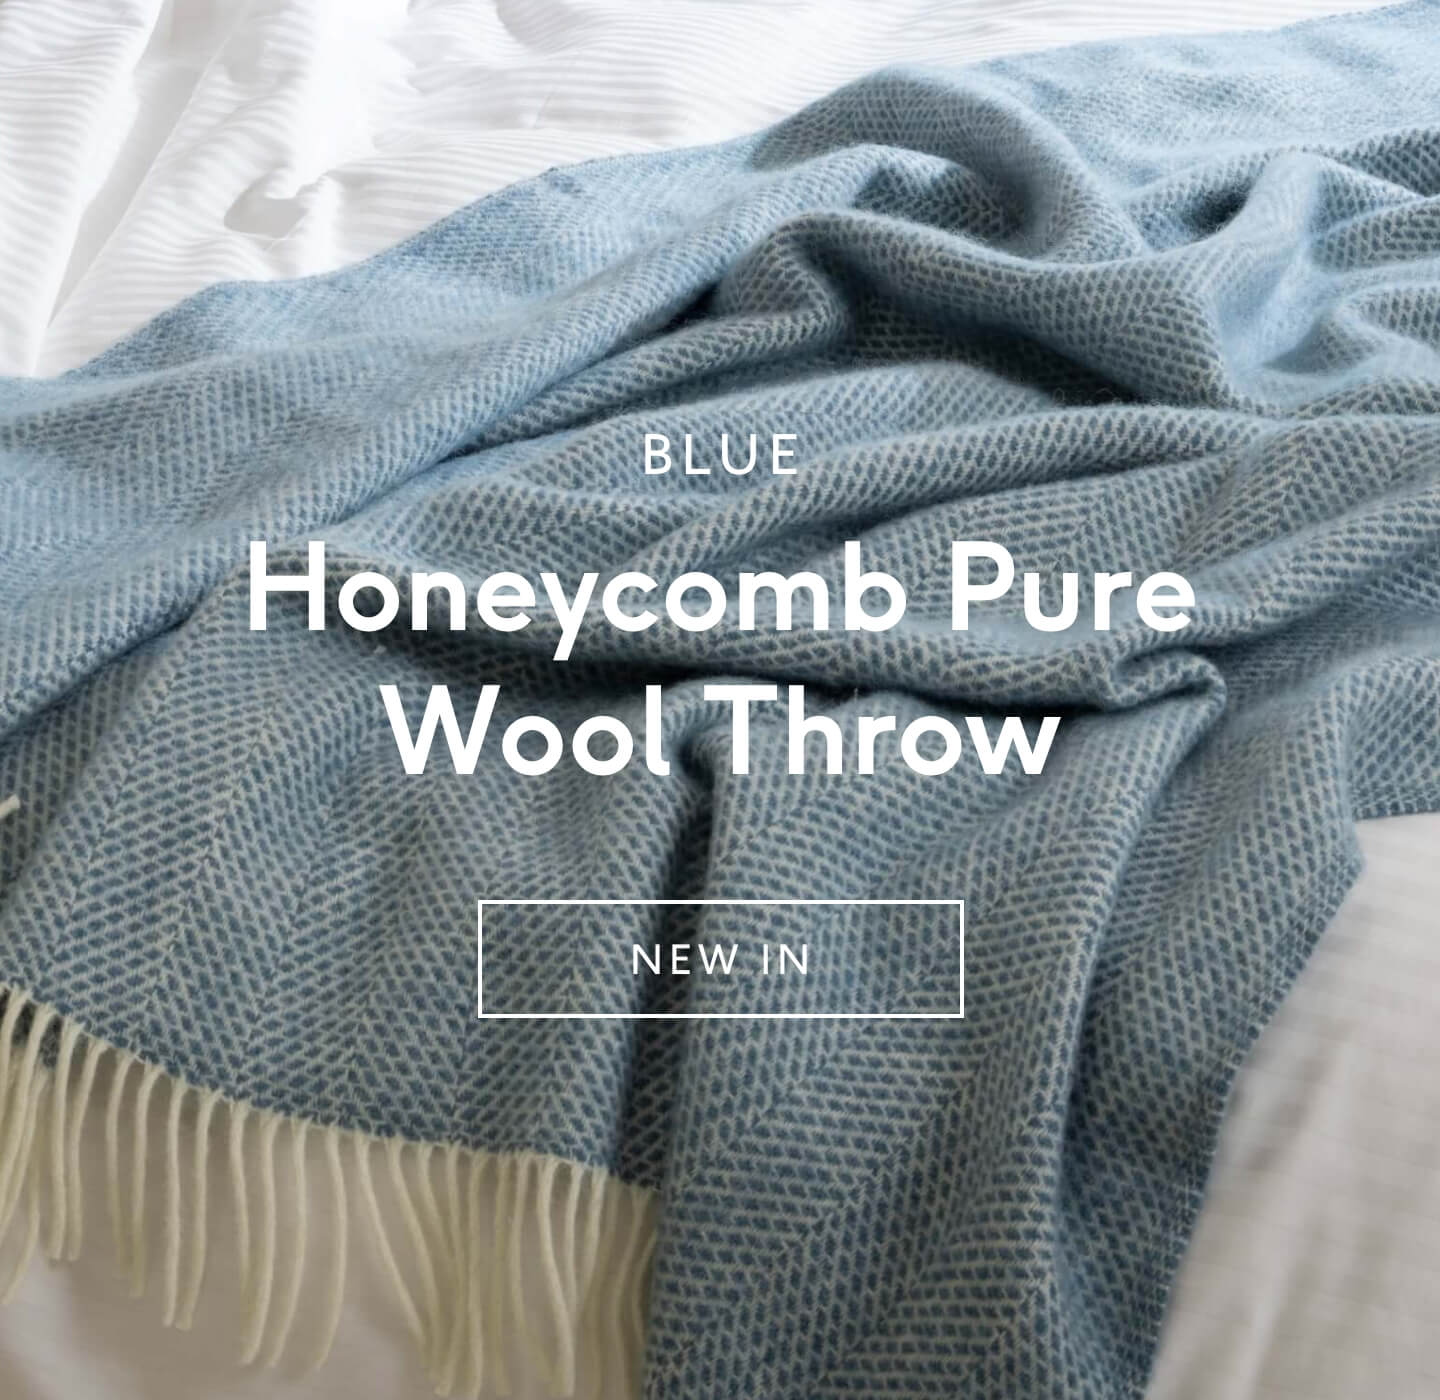 Blue Honeycomb Pure Wool Throw - New in